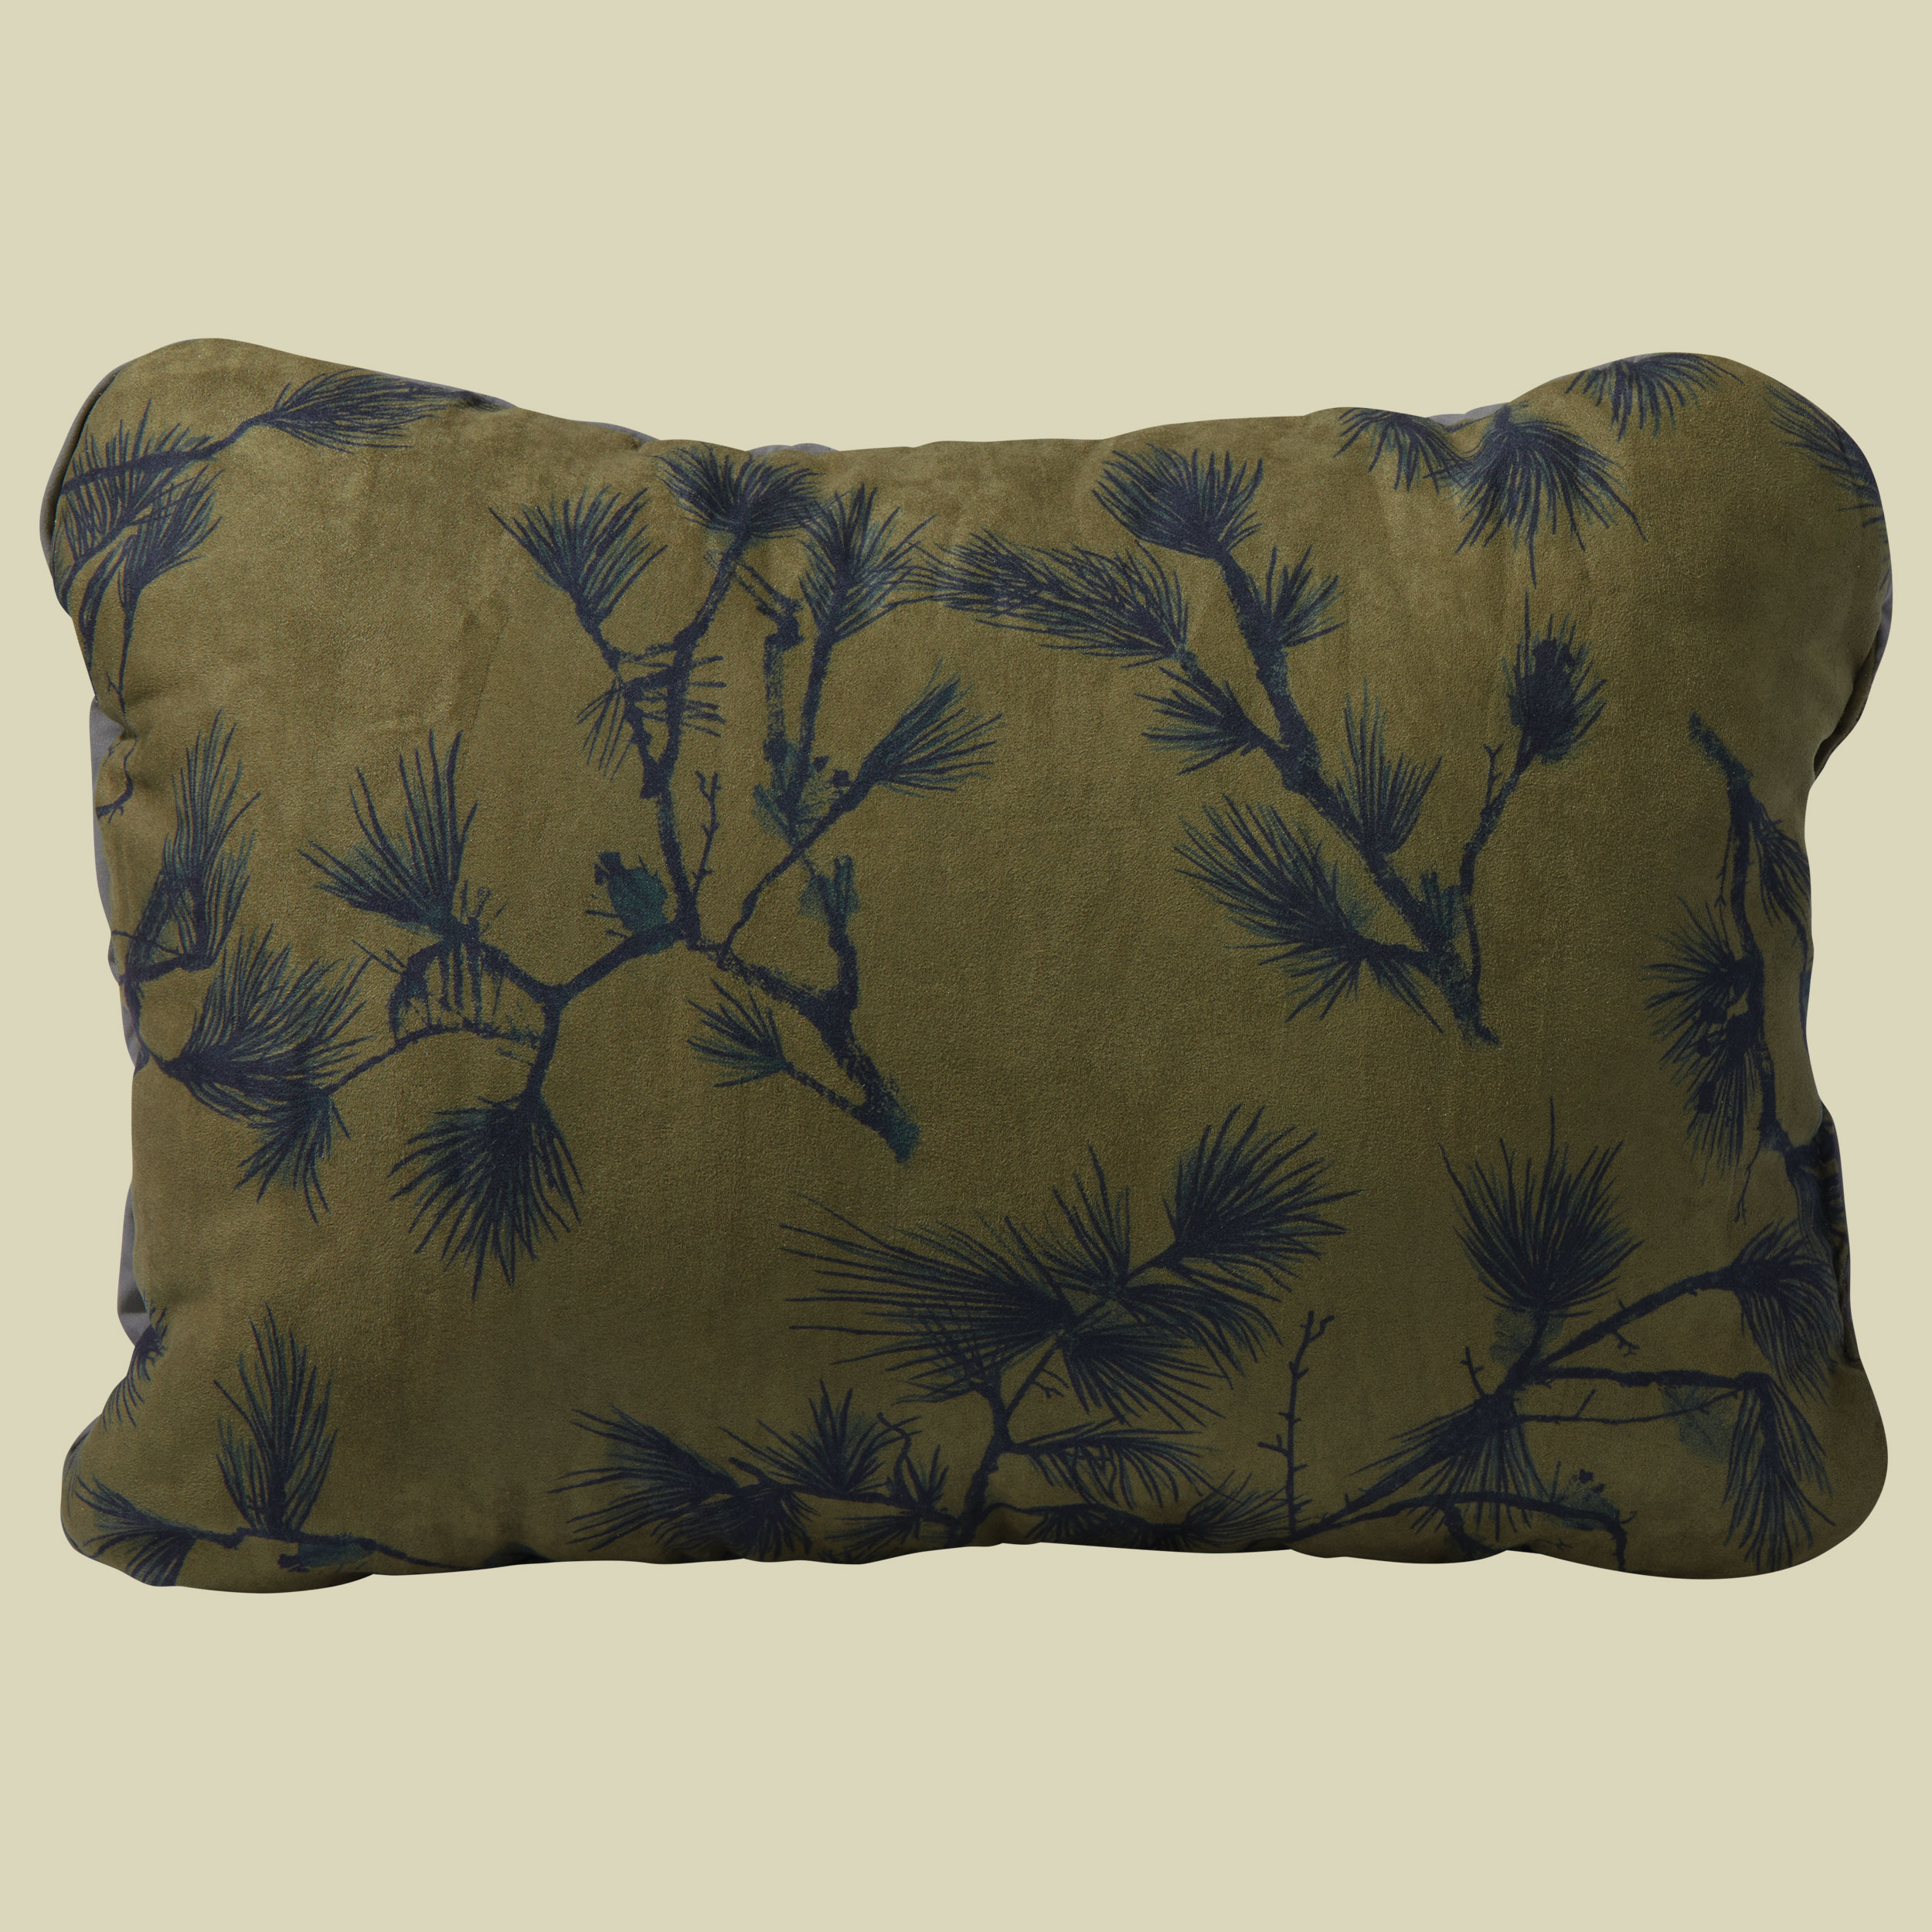 Compressible Pillow Cinch Größe small Farbe pines